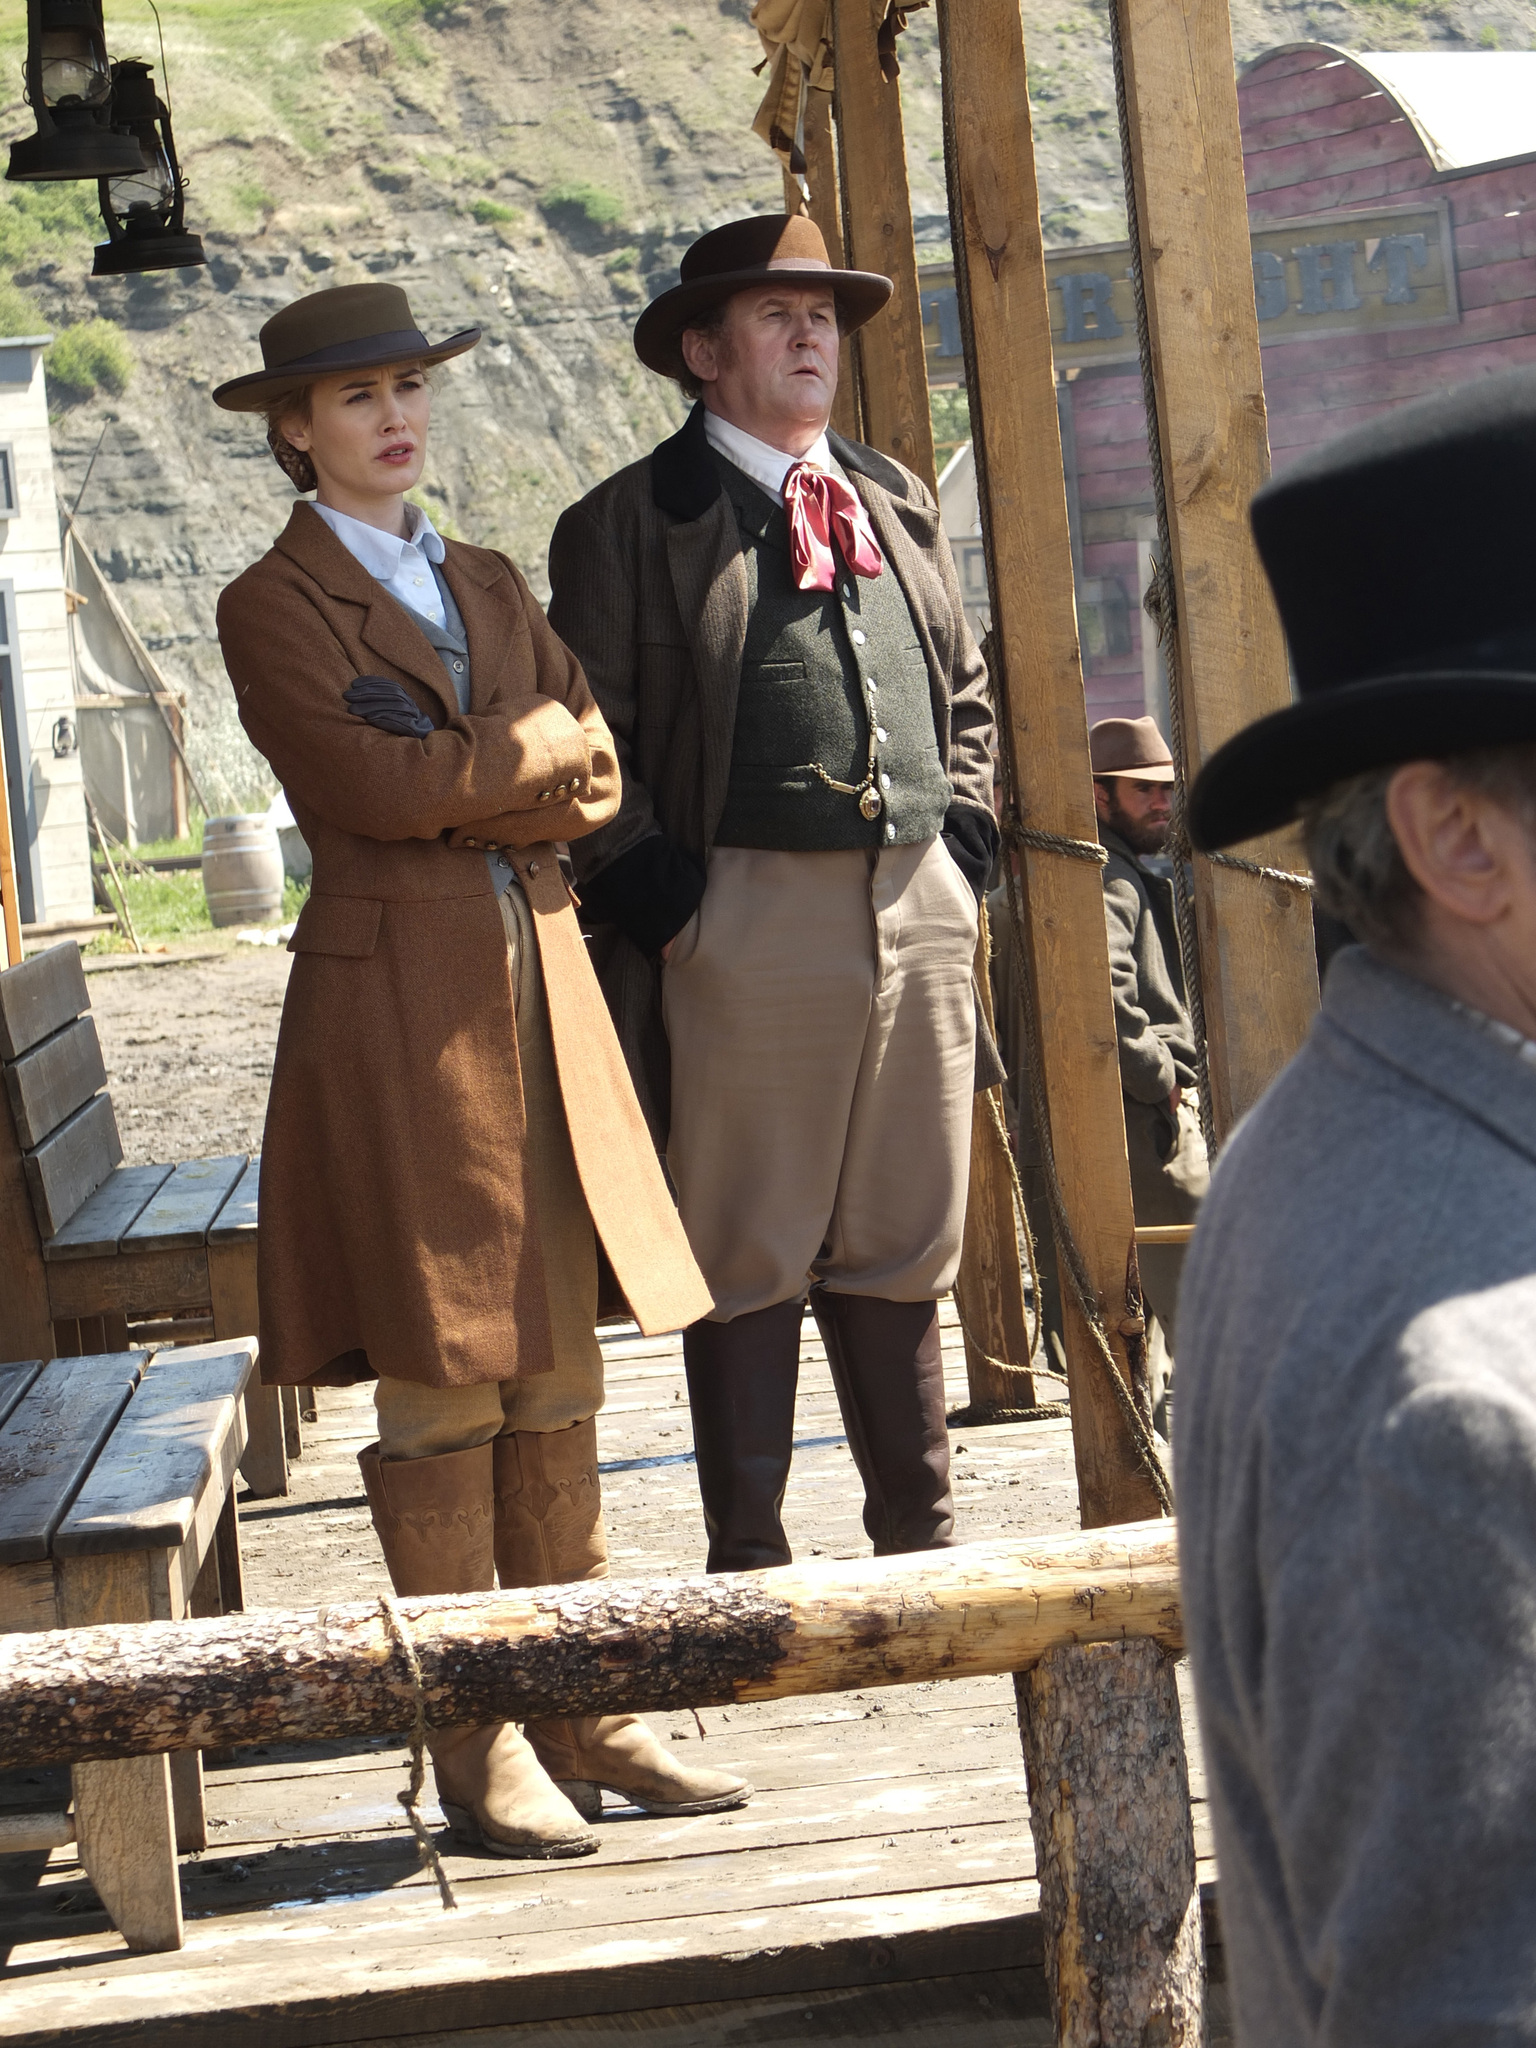 Still of Colm Meaney and Dominique McElligott in Hell on Wheels (2011)